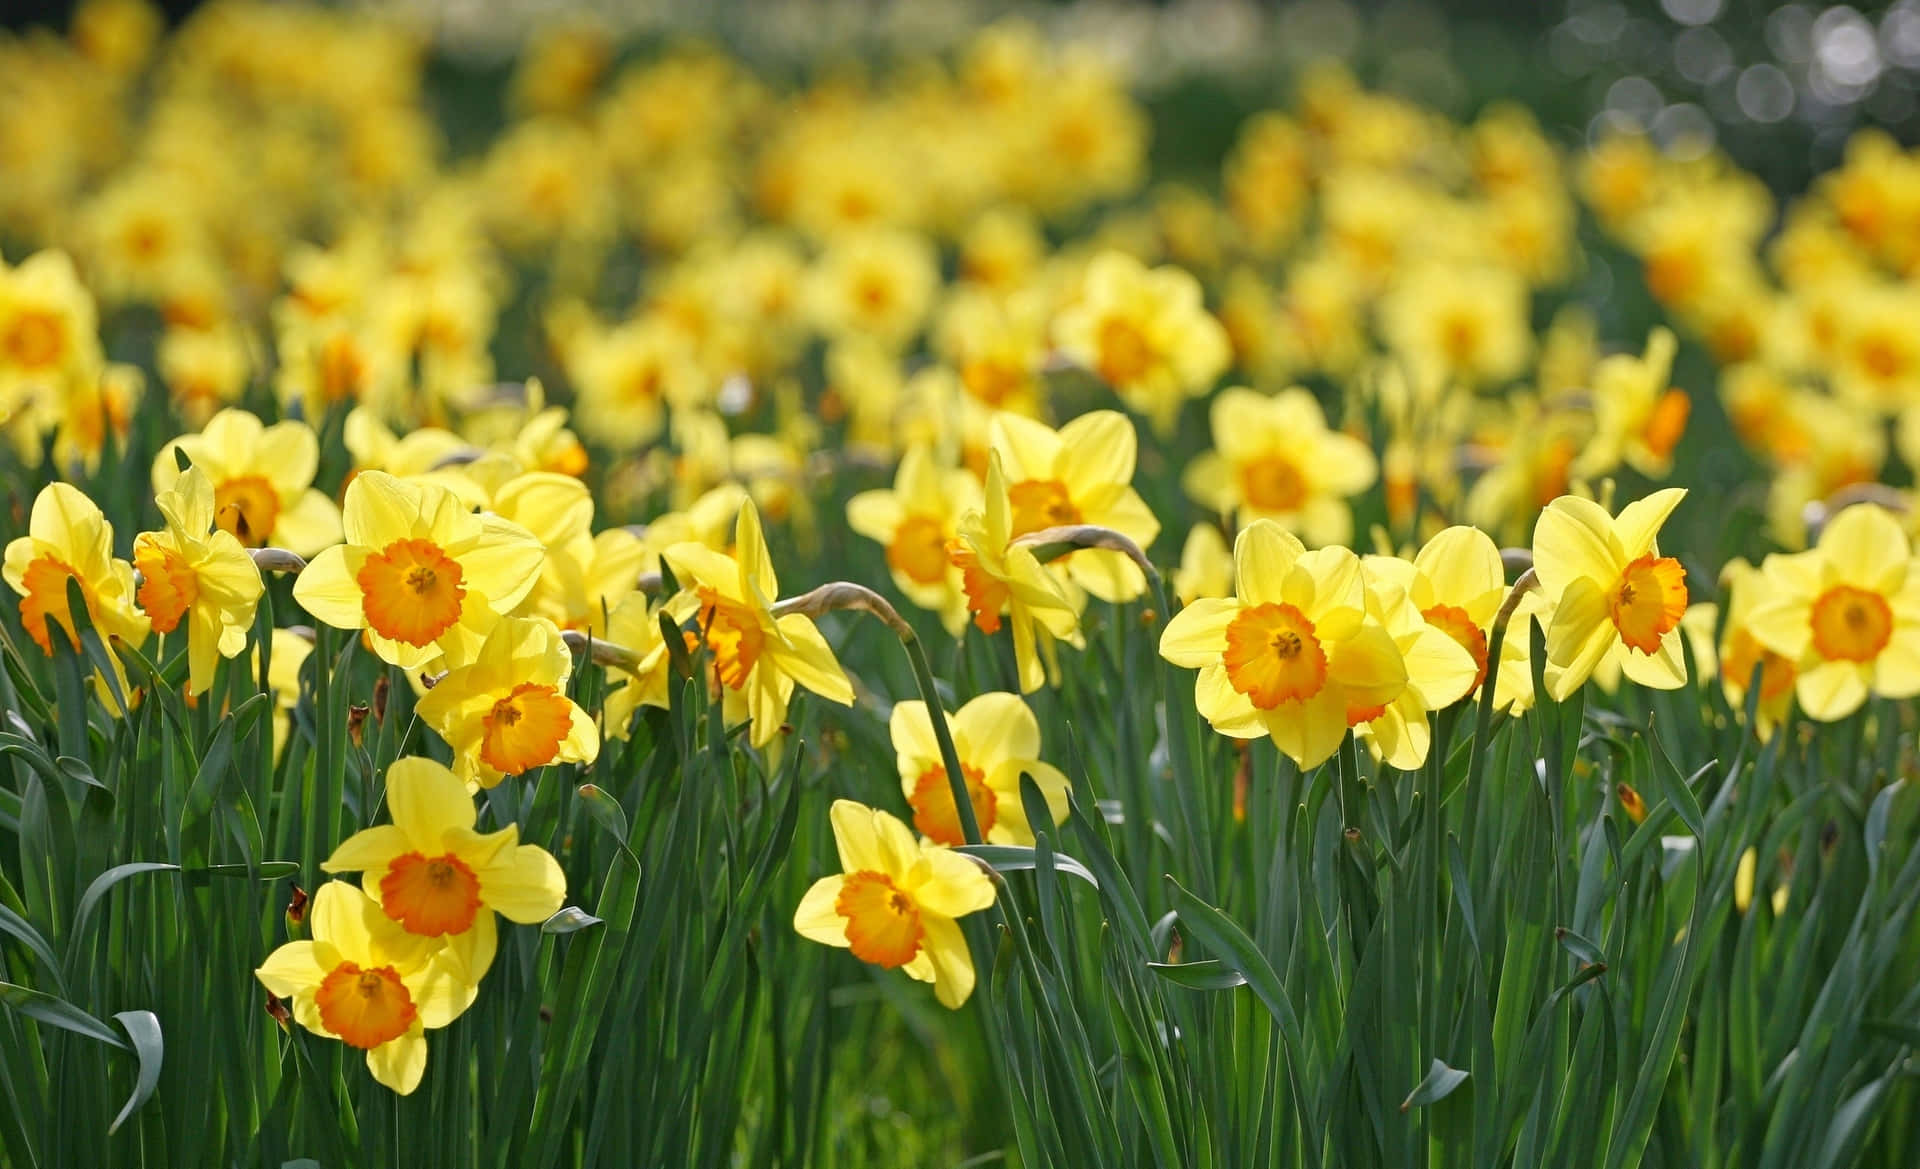 Vibrant Yellow Daffodils in a Garden Wallpaper